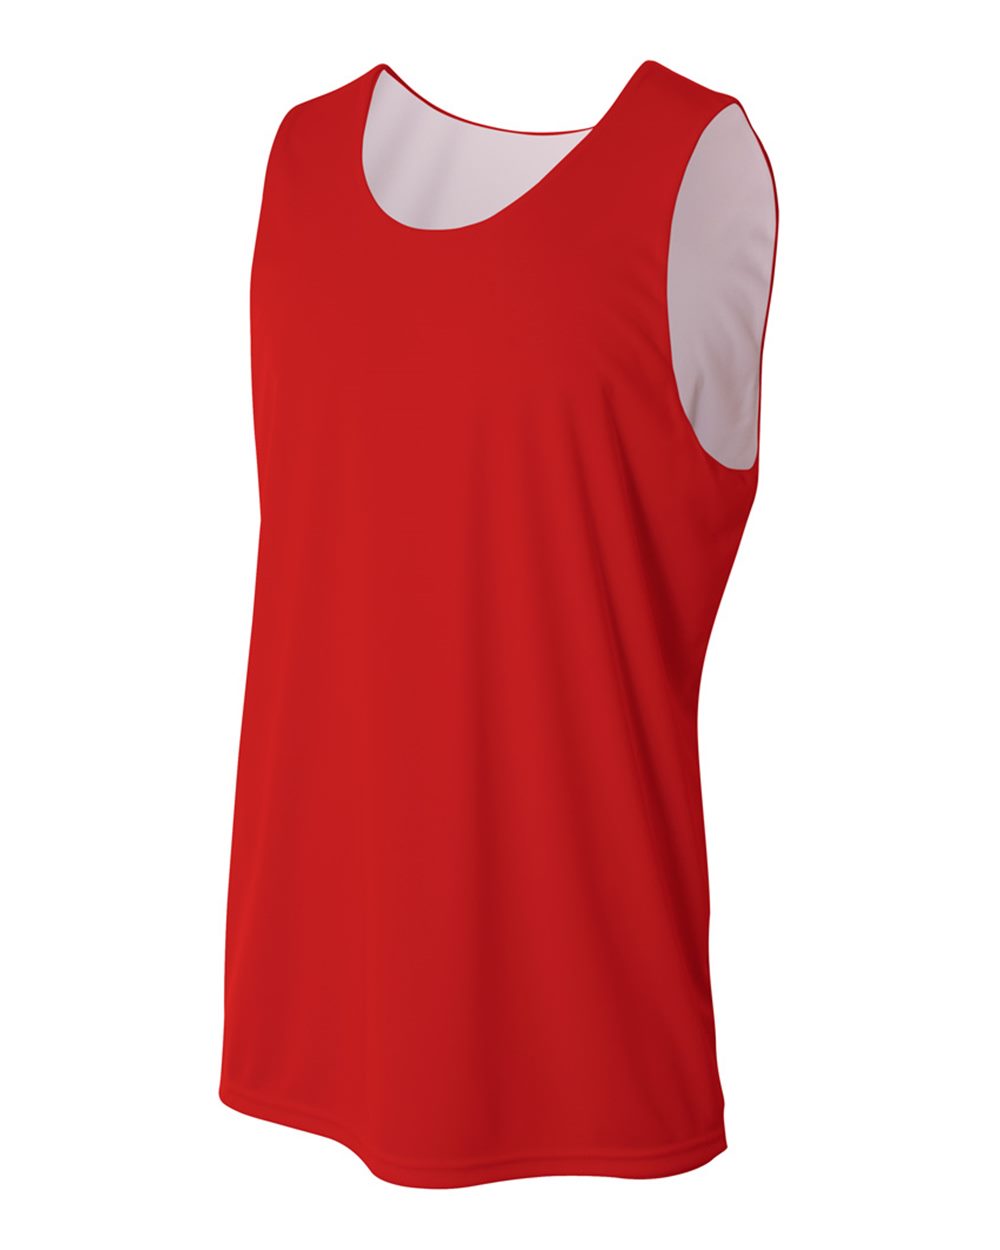 adidas 3-STRIPES PRACTICE Reversible Jersey, Red-White